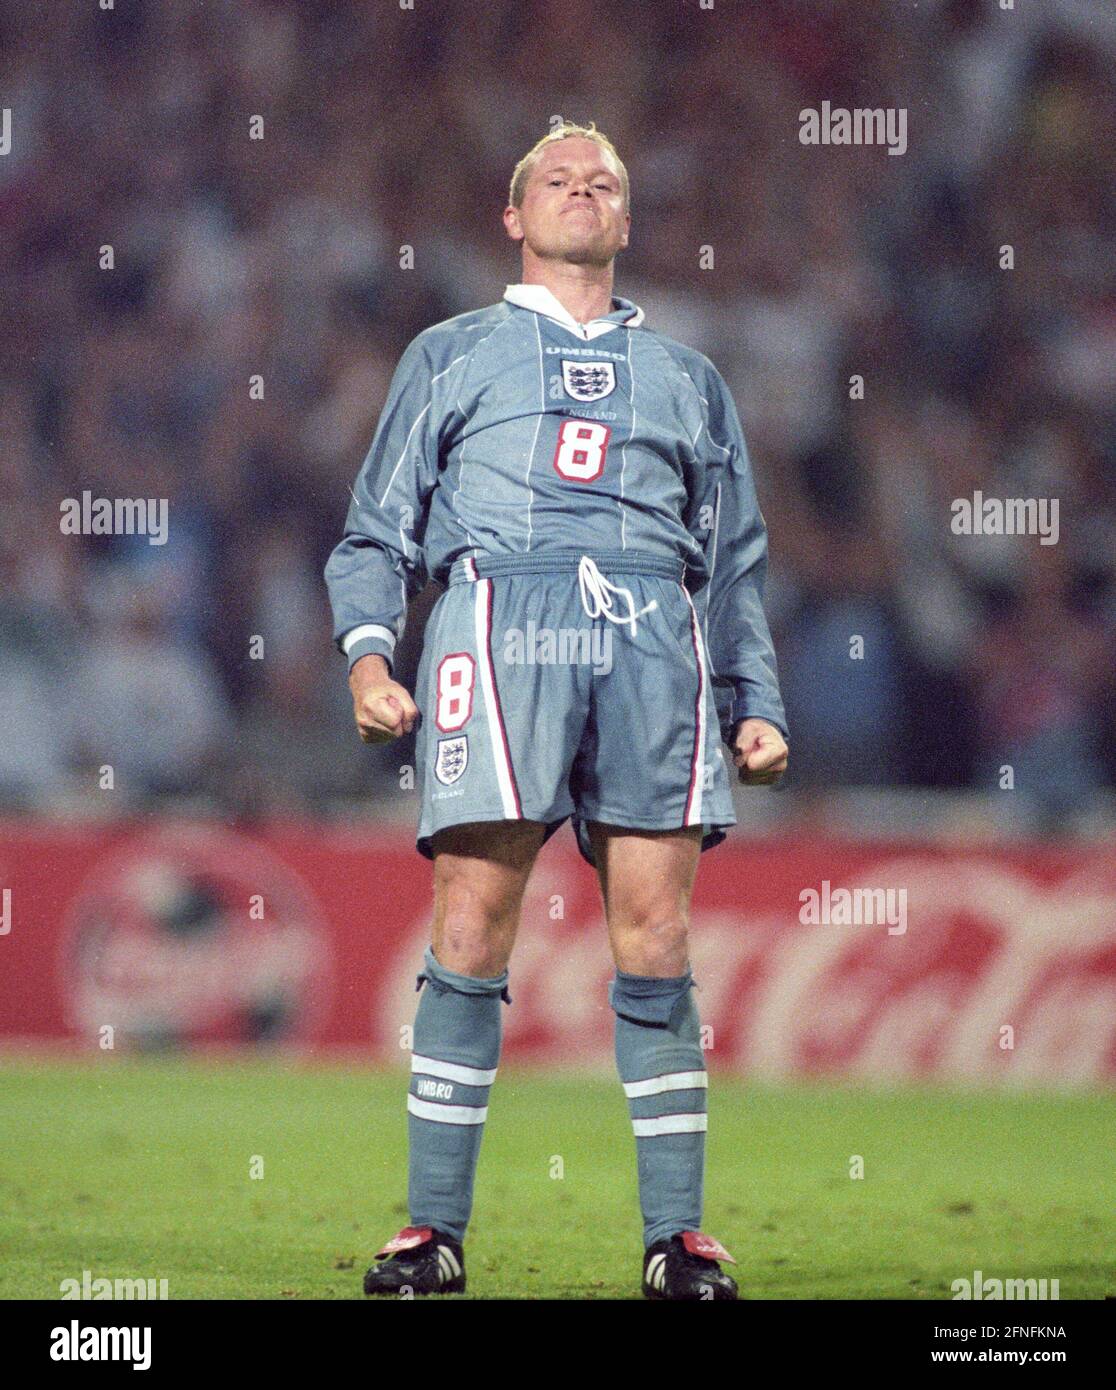 European Championship 1996 semi-final: Germany - England 7:6 n.E./26.06.1996. Paul Cascoigne (Engl.) cheers arrogantly after converting a penalty against Germany.  No model release ! [automated translation] Stock Photo